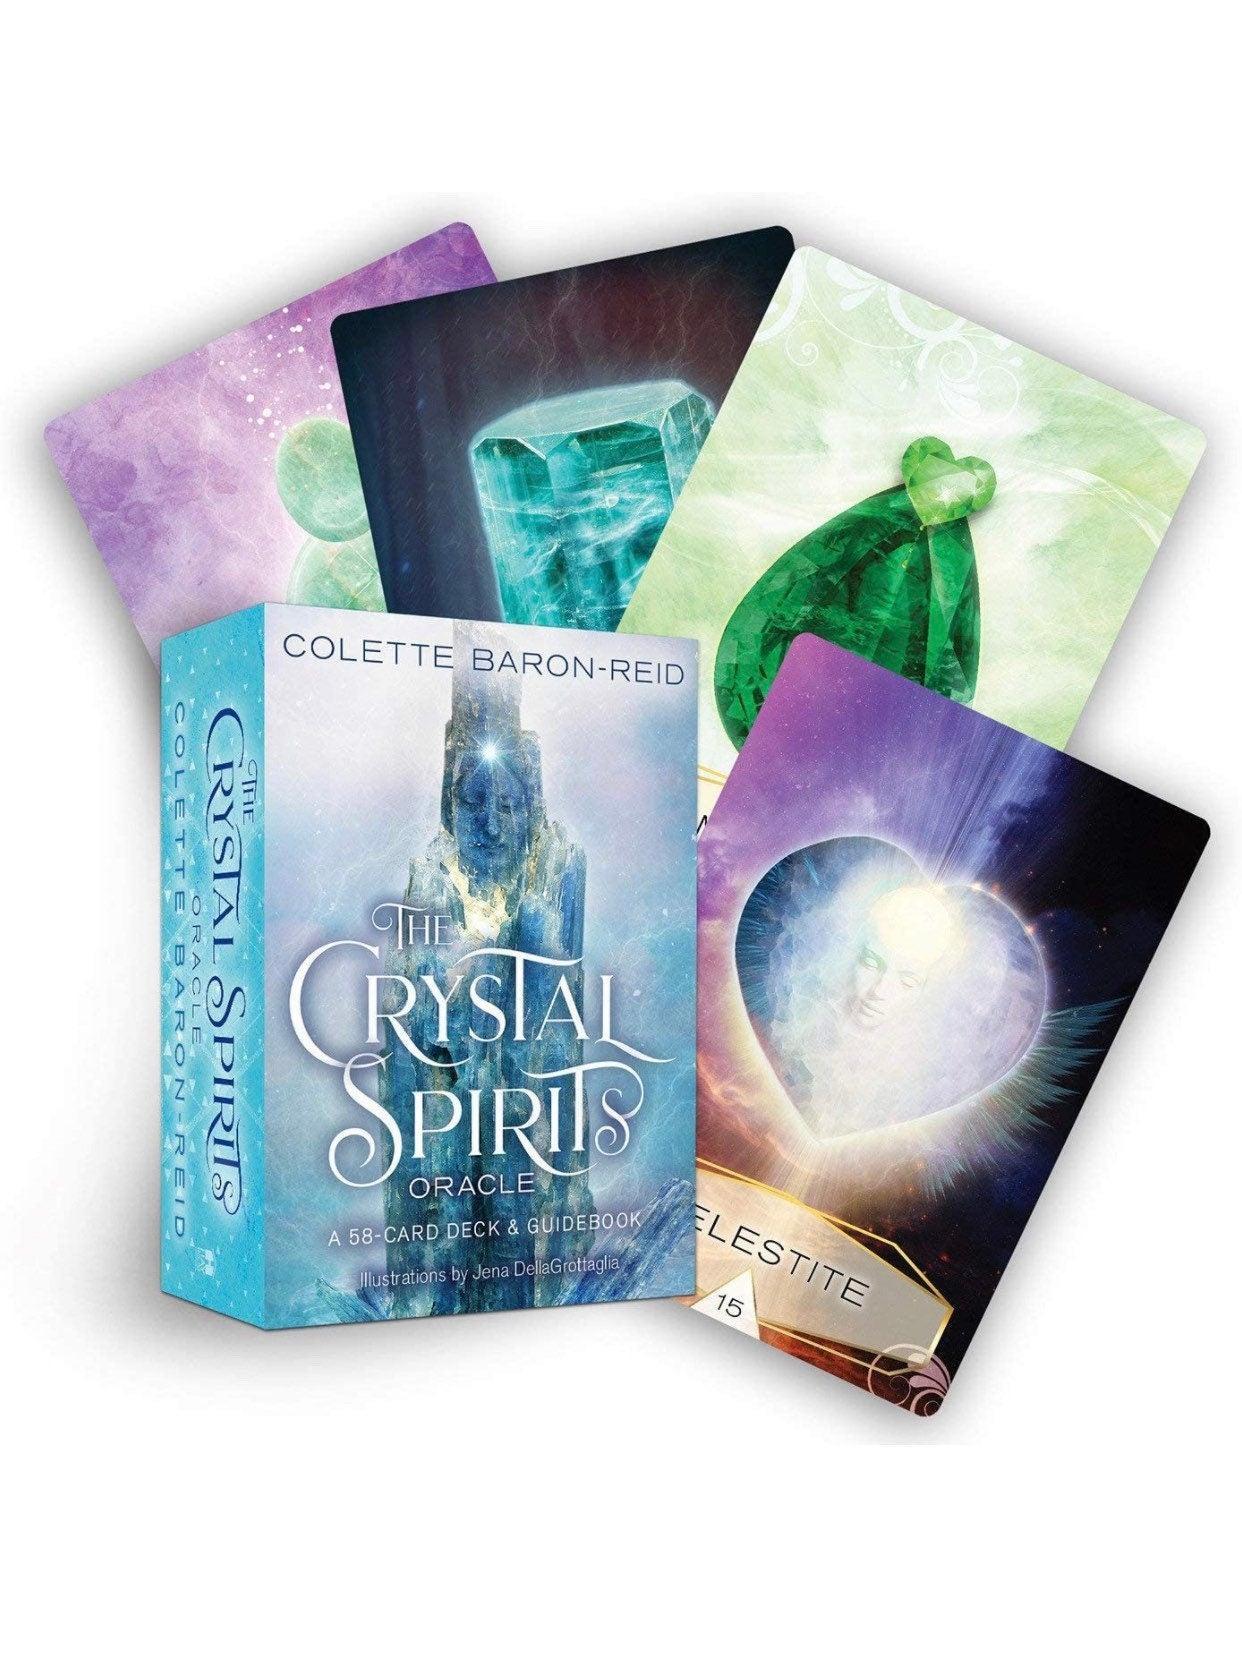 Crystal Spirits Oracle: A 58-Card Deck and Guidebook, Original from England. - Blu Lunas Shoppe